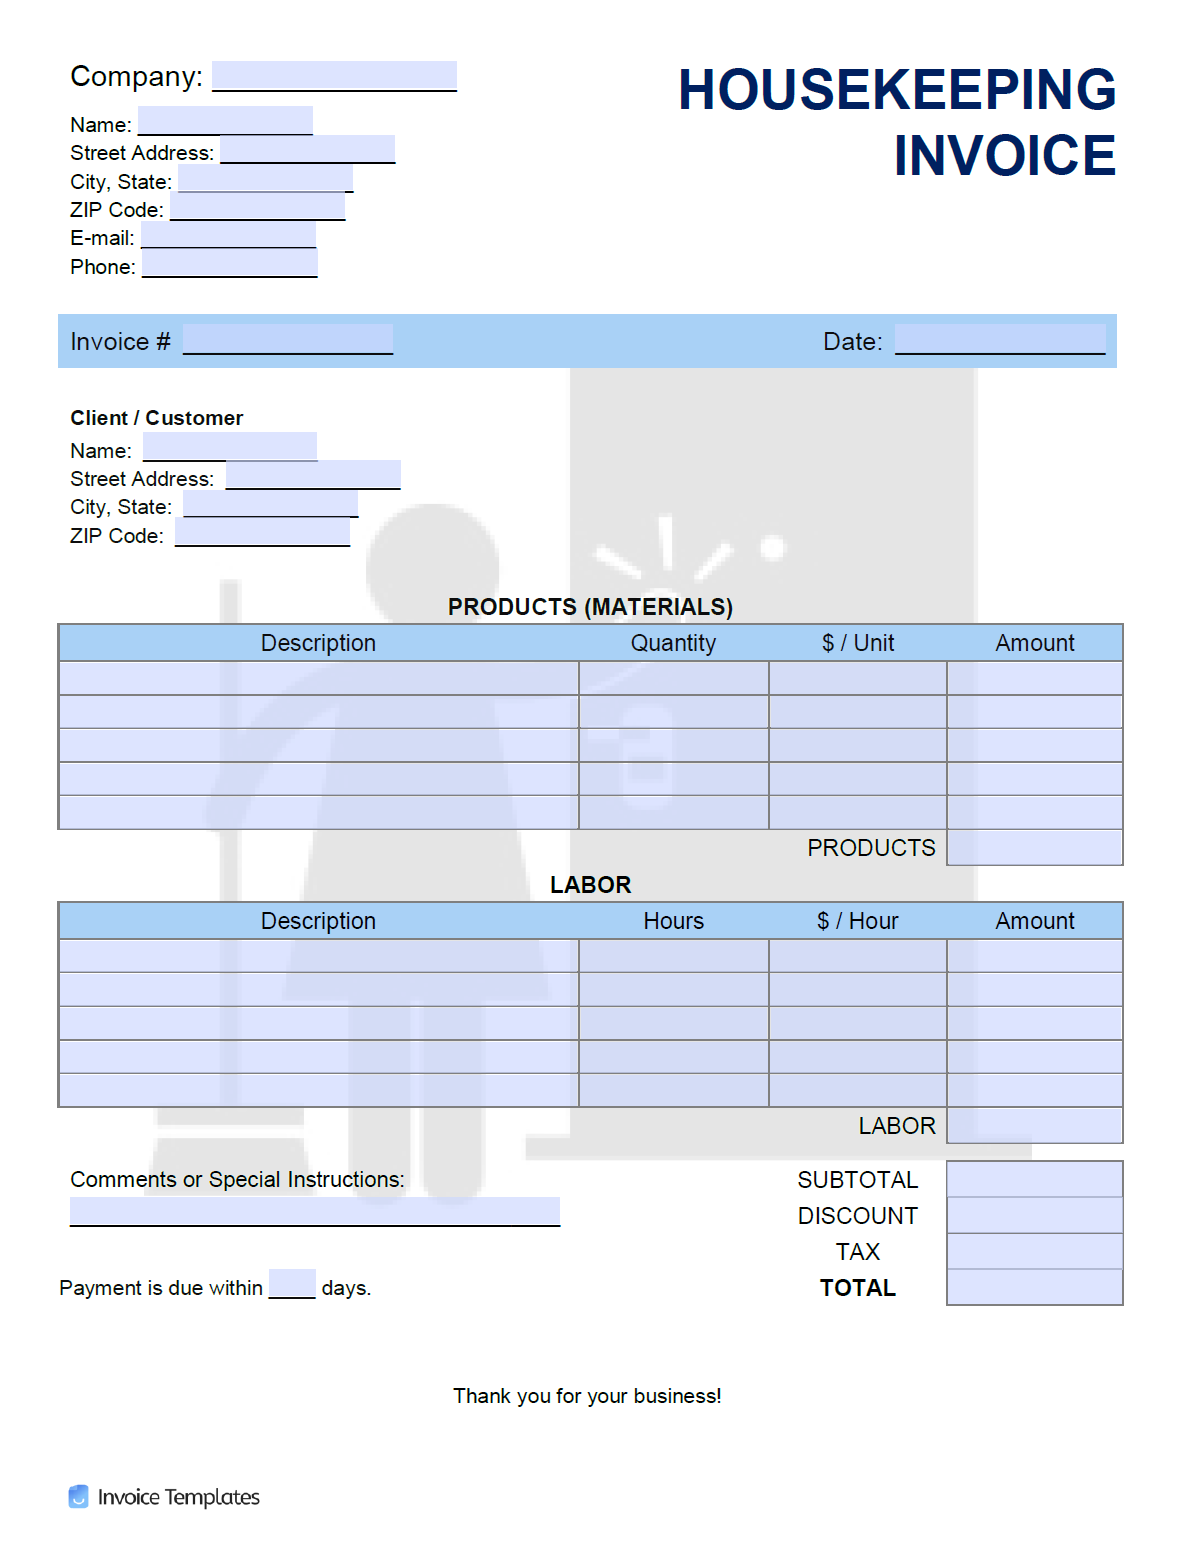 Free Housekeeping Invoice Template  PDF  WORD  EXCEL With Regard To Itemized Invoice Template